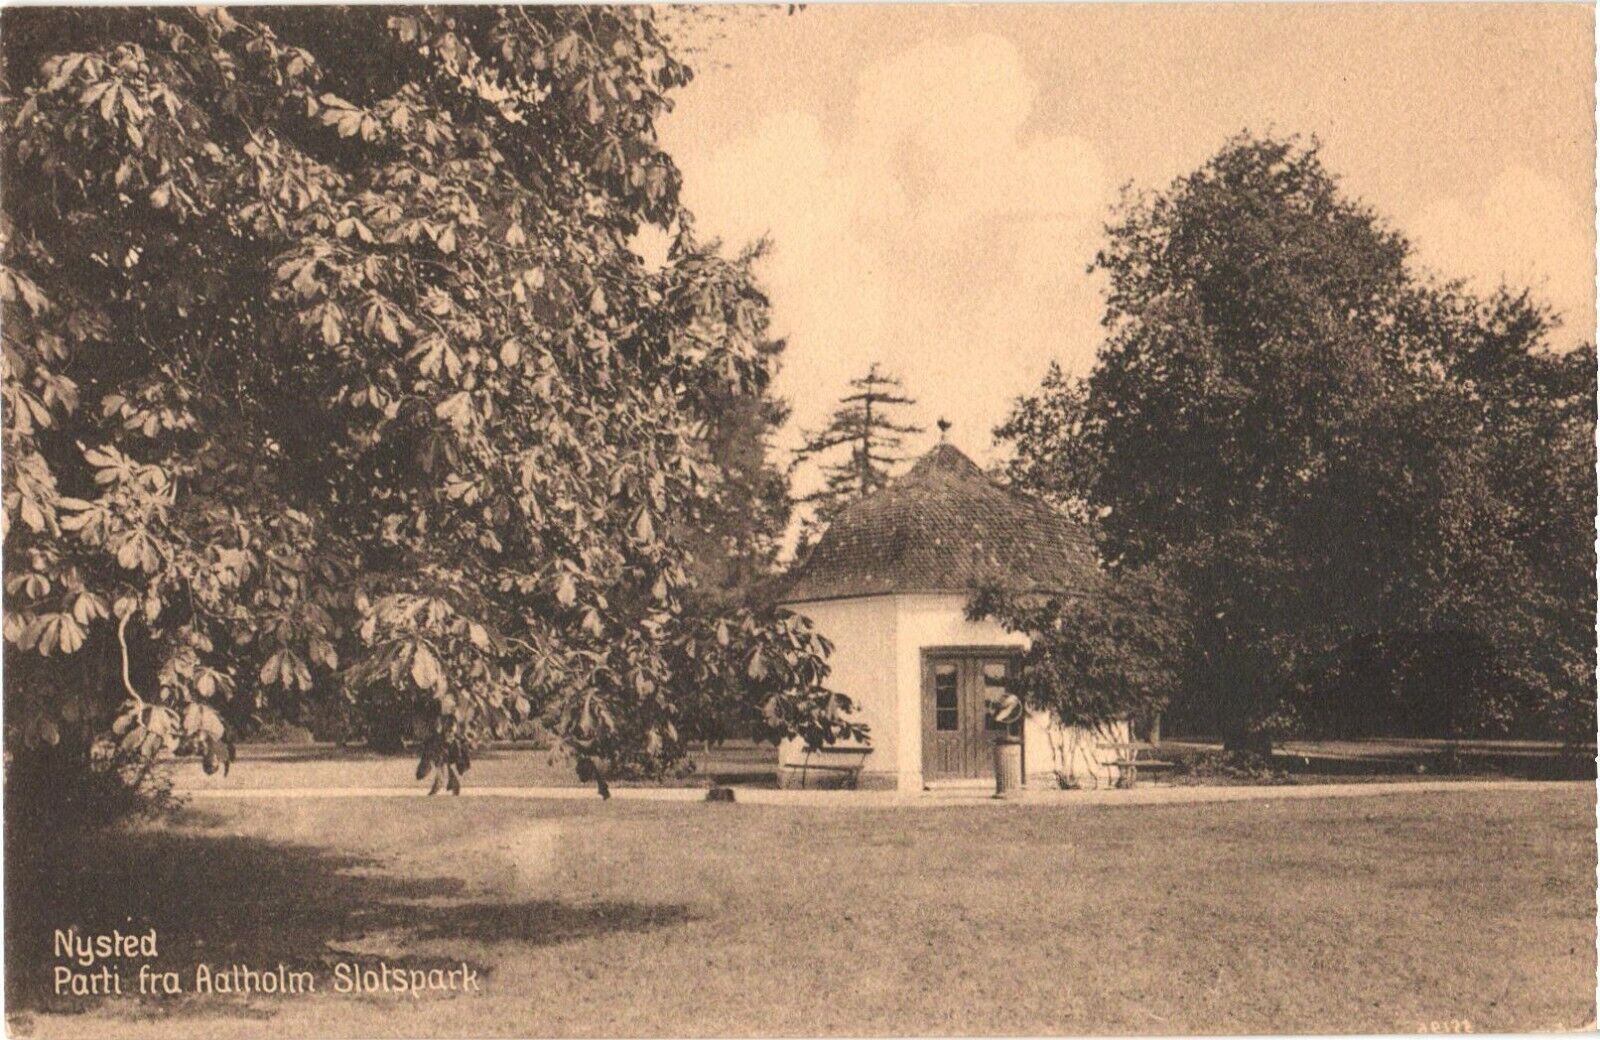 Small House At Aalholm Castle\'s Park, Nysted, Guldborgsund, Denmark Postcard